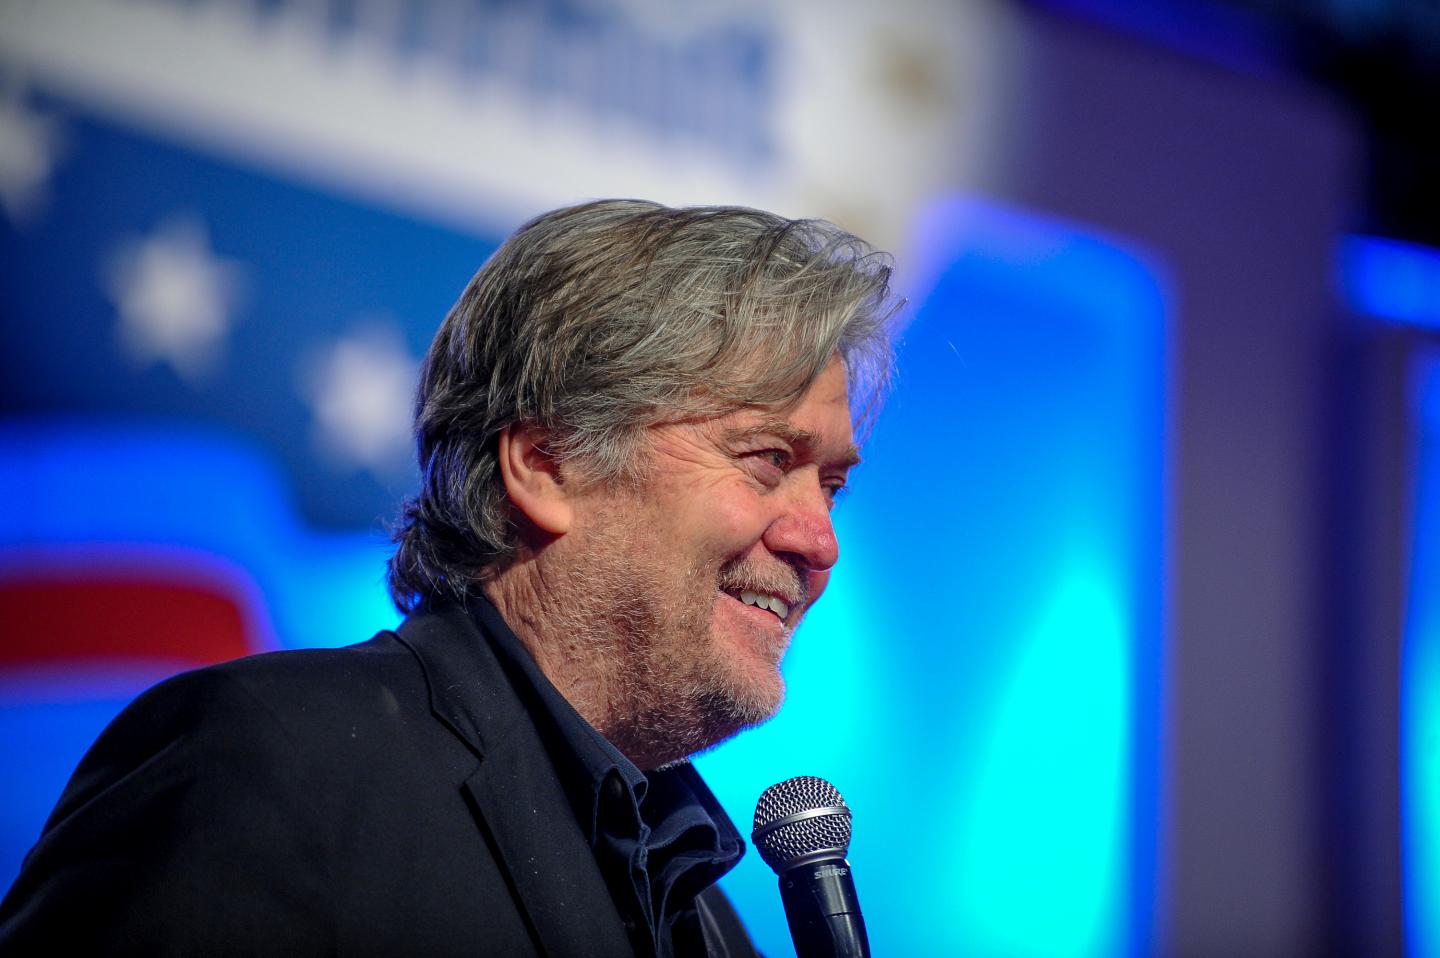 Steve Bannon Praises Islam in New Book but Compares Radical Muslims to Communists